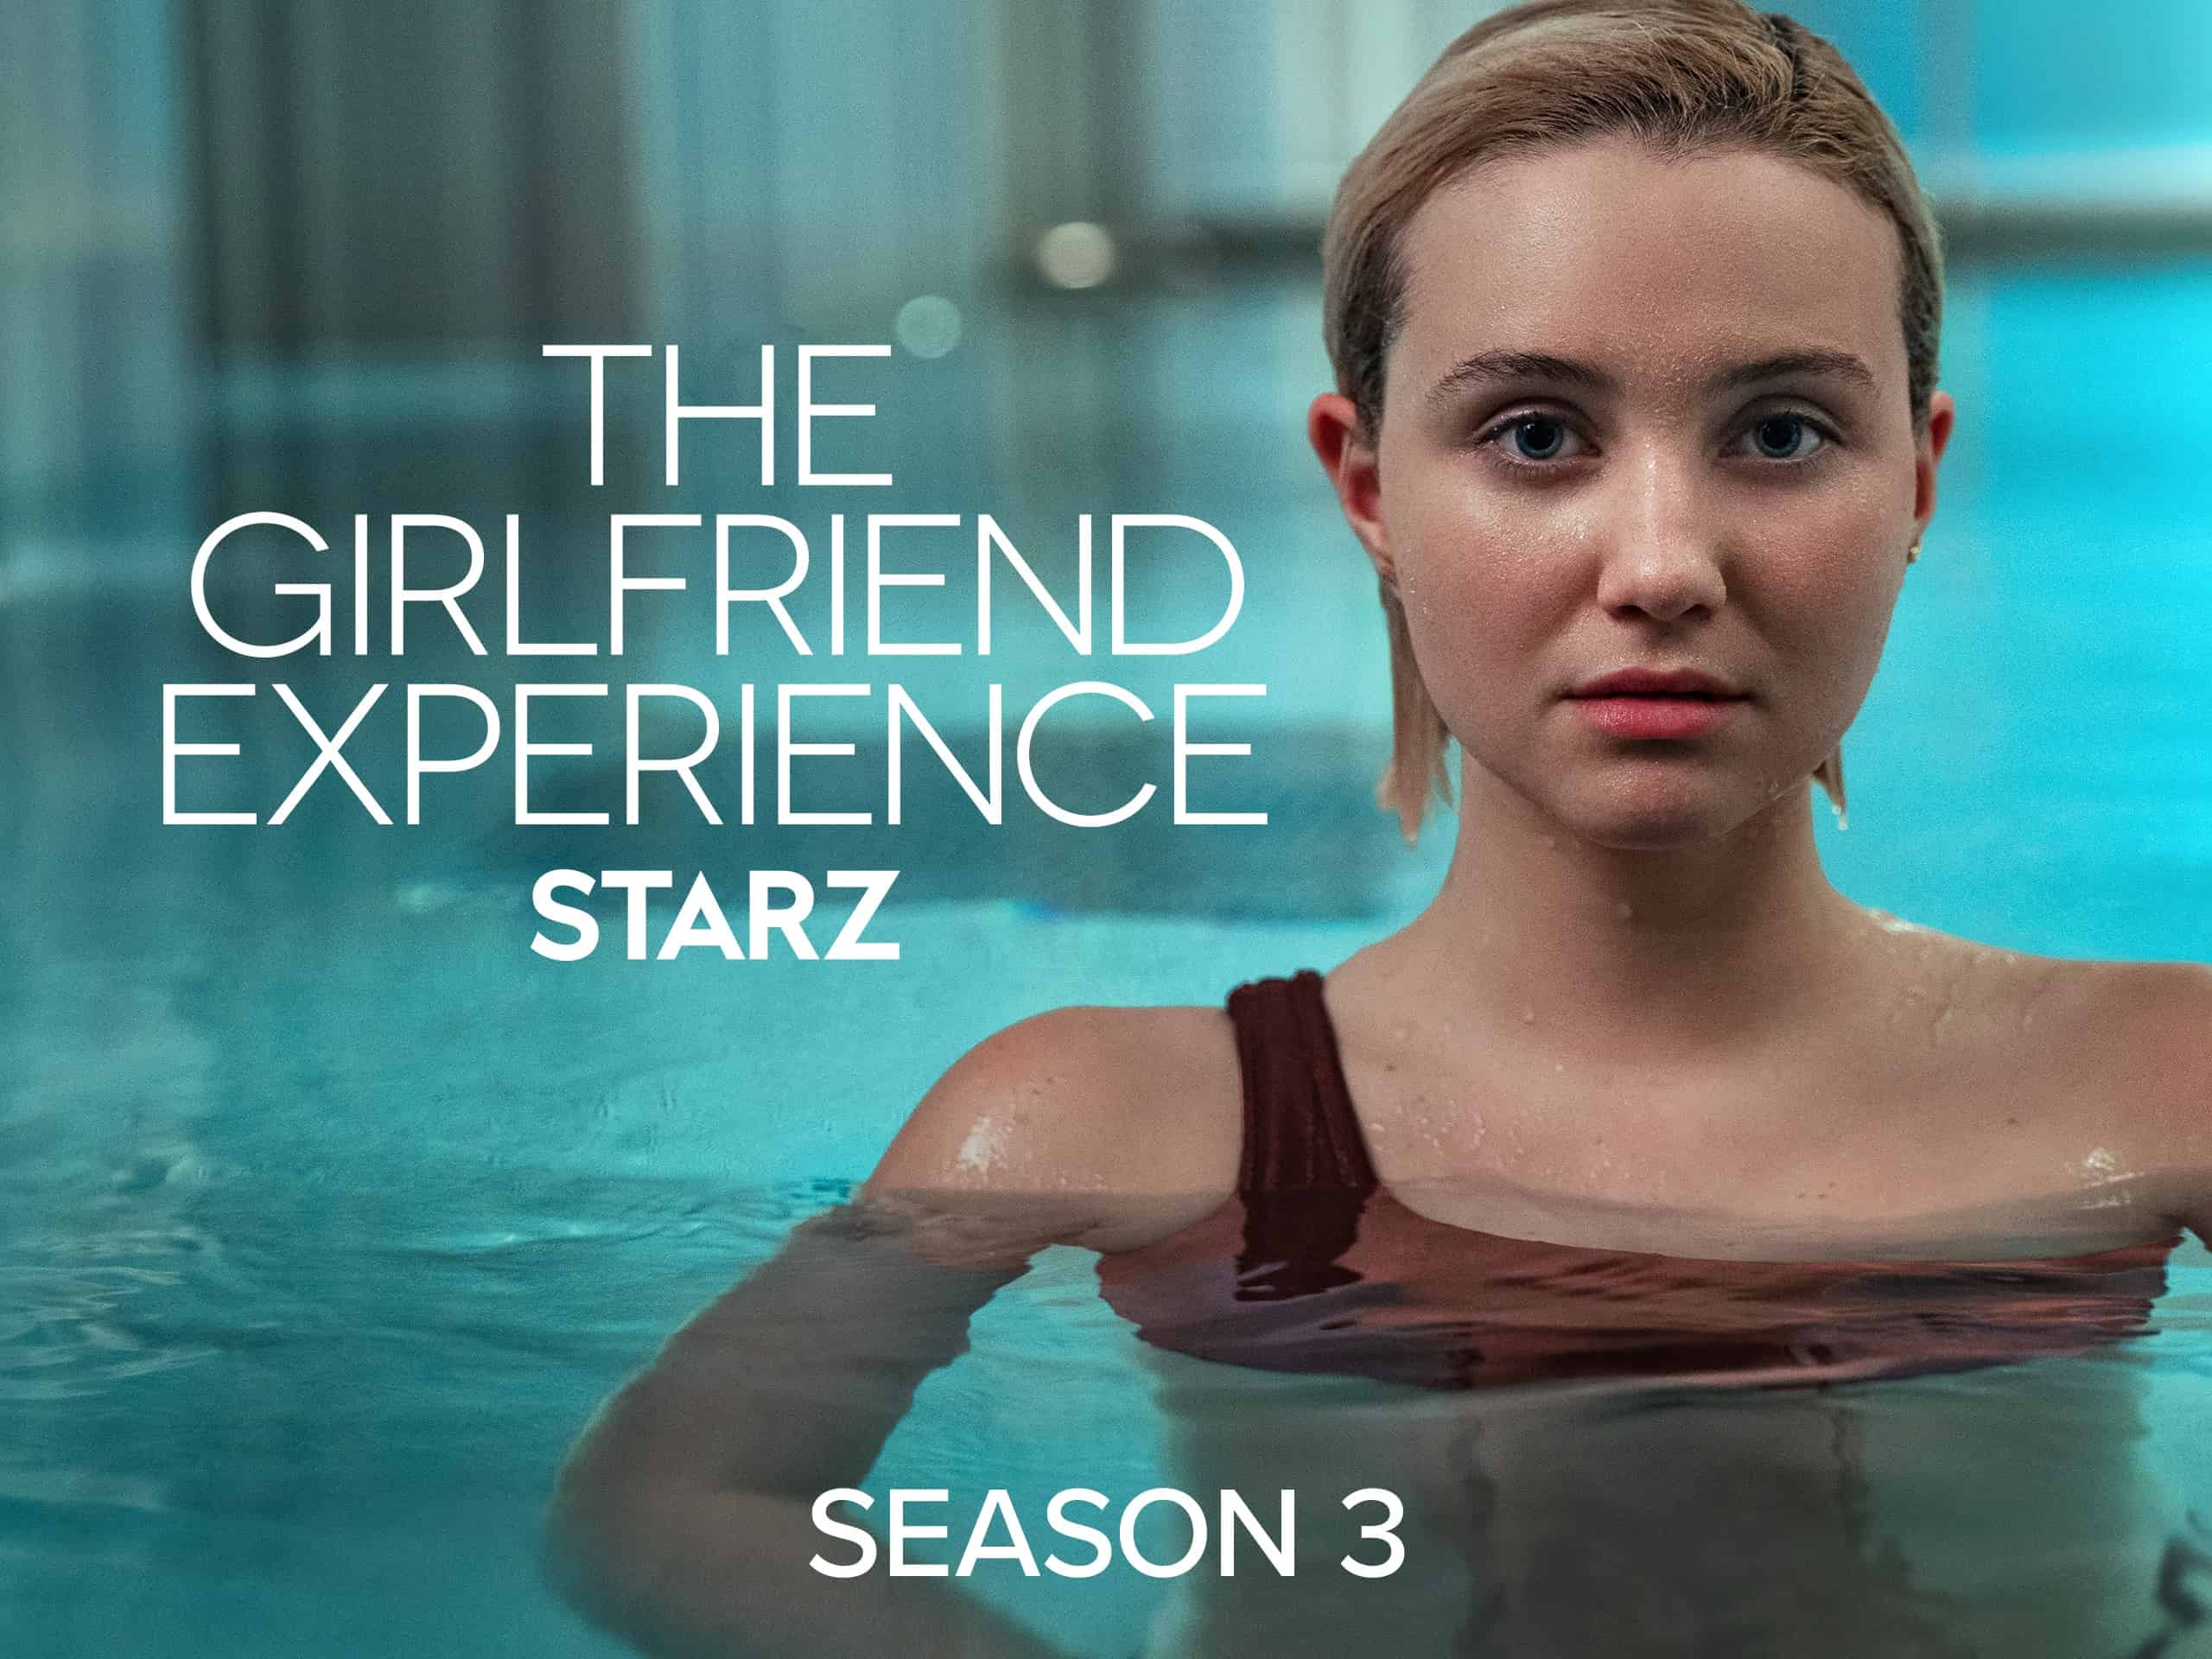 All About The Latest Season of “The Girlfriend Experience”